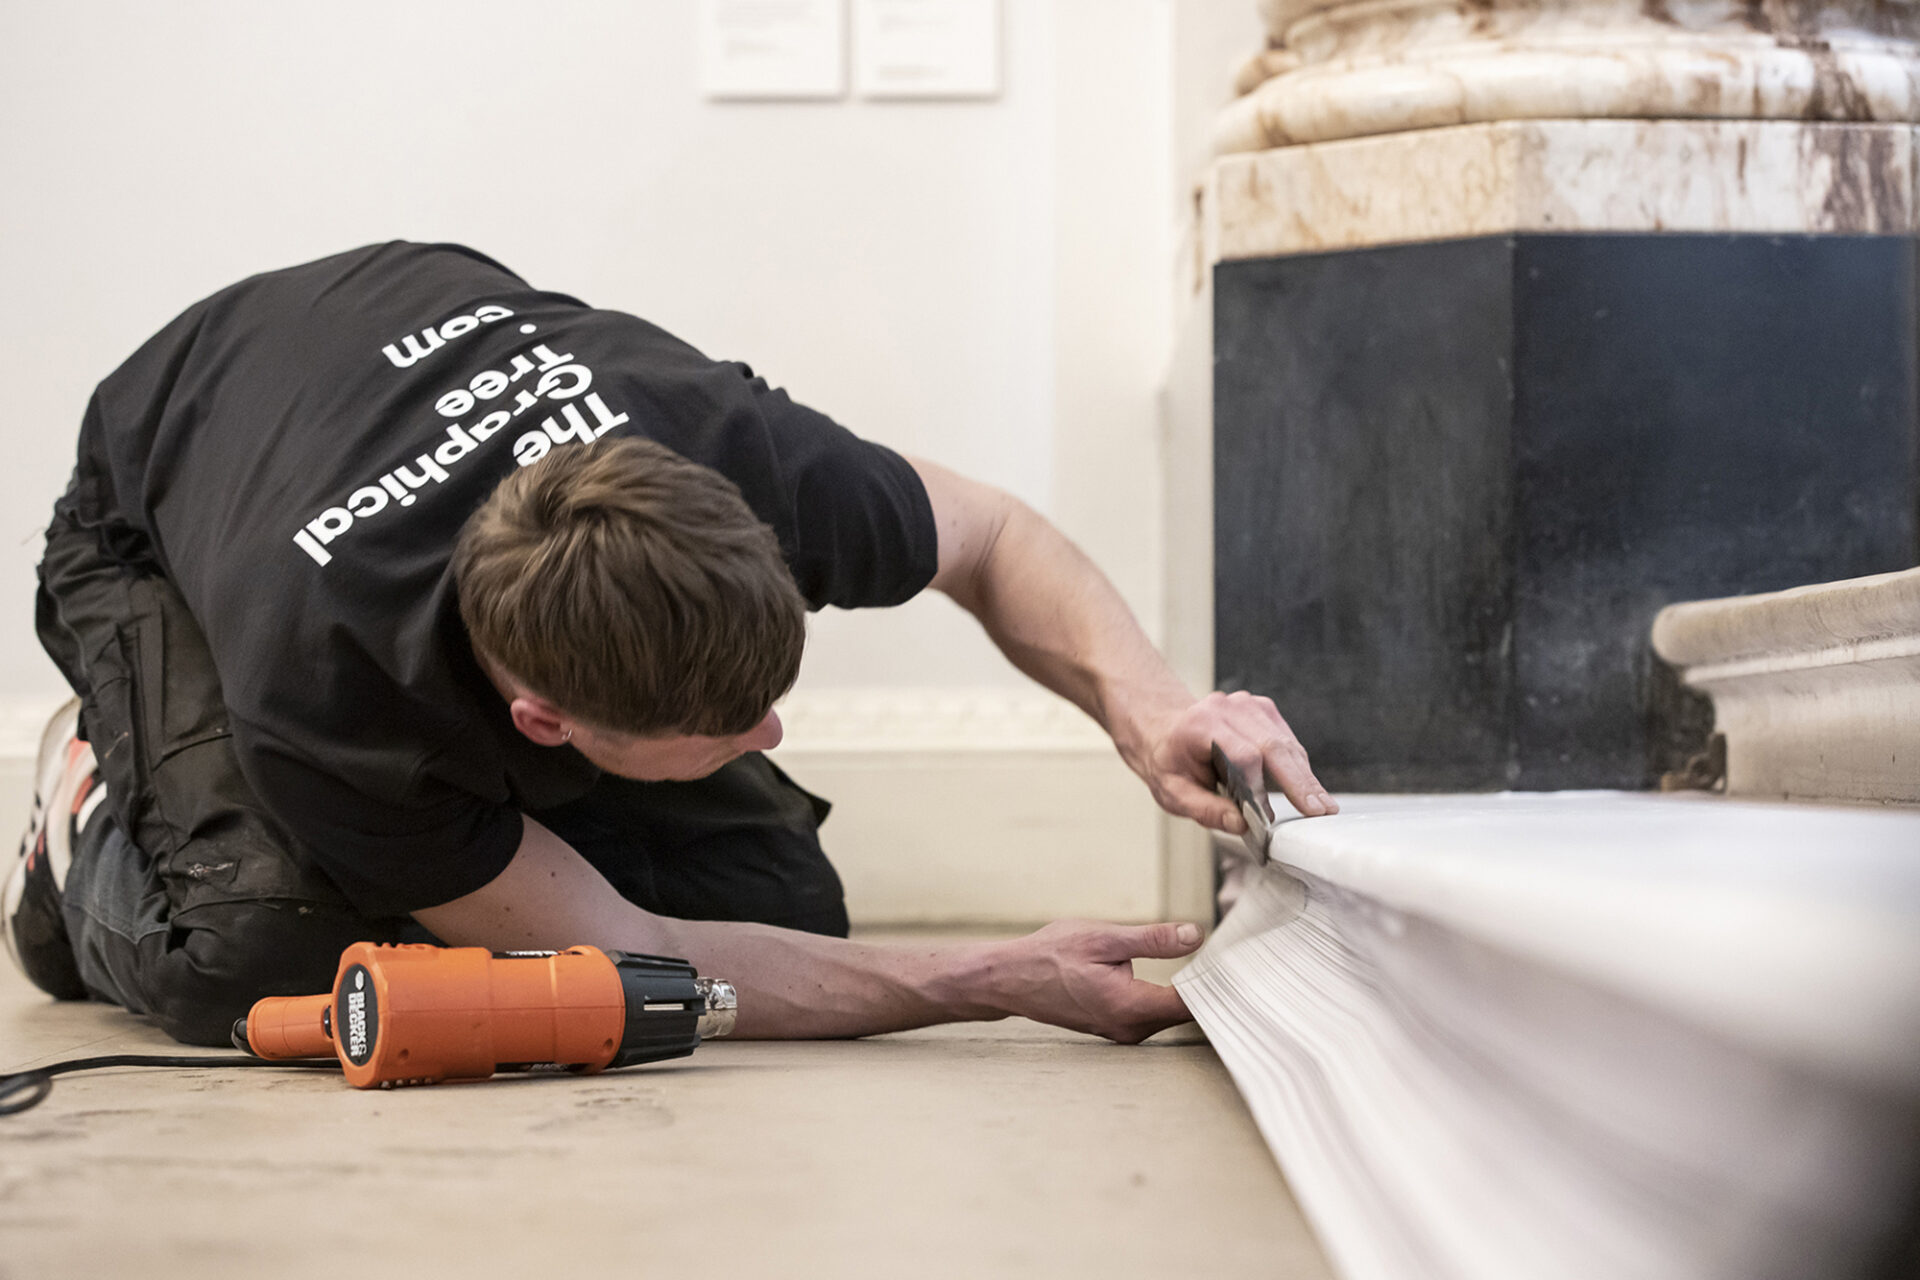 Printed floor graphics for Royal Academy of Arts Picasso exhibition installed in London